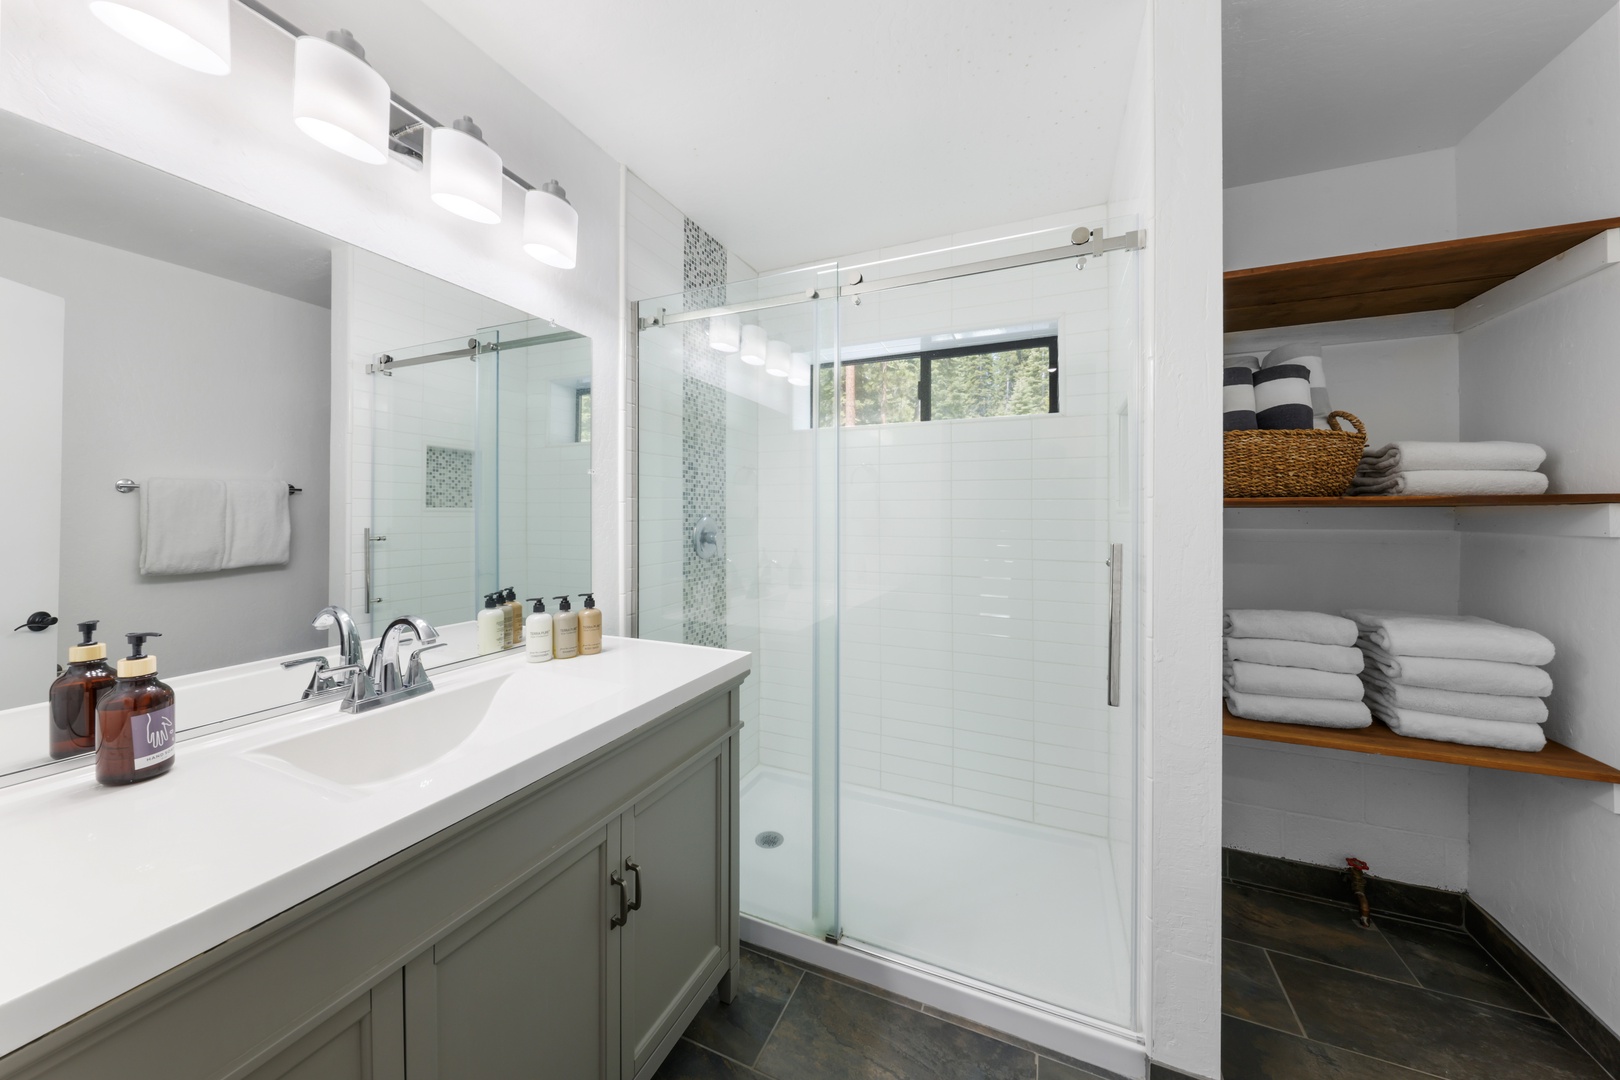 There's No Shortage Of Fun In This Tropical Modern Delray Oasis bathroom  with green tile shower, black iron frames and white sink on wood vanity -  Luxe Interiors + Design